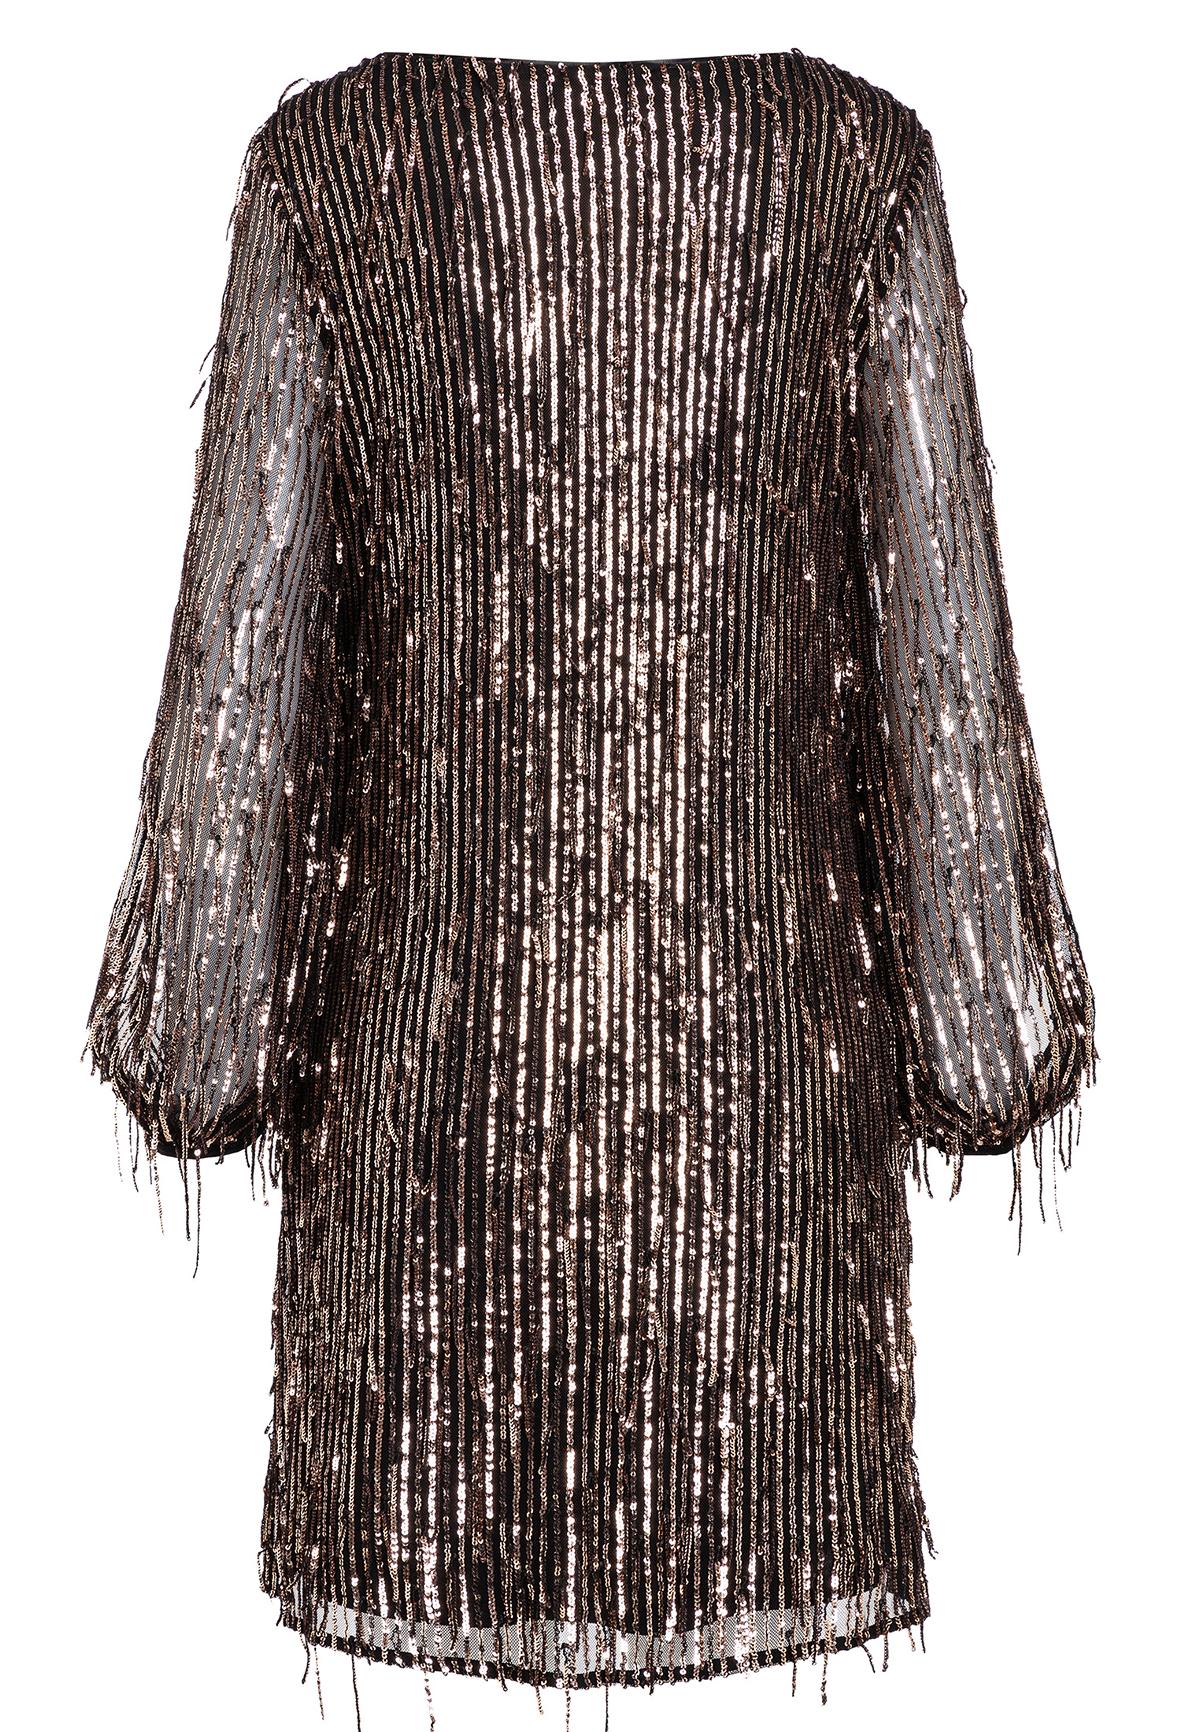 Copper Colored Tunic Dress Ecaiby with Fringes and Sequins | Ana Alcazar